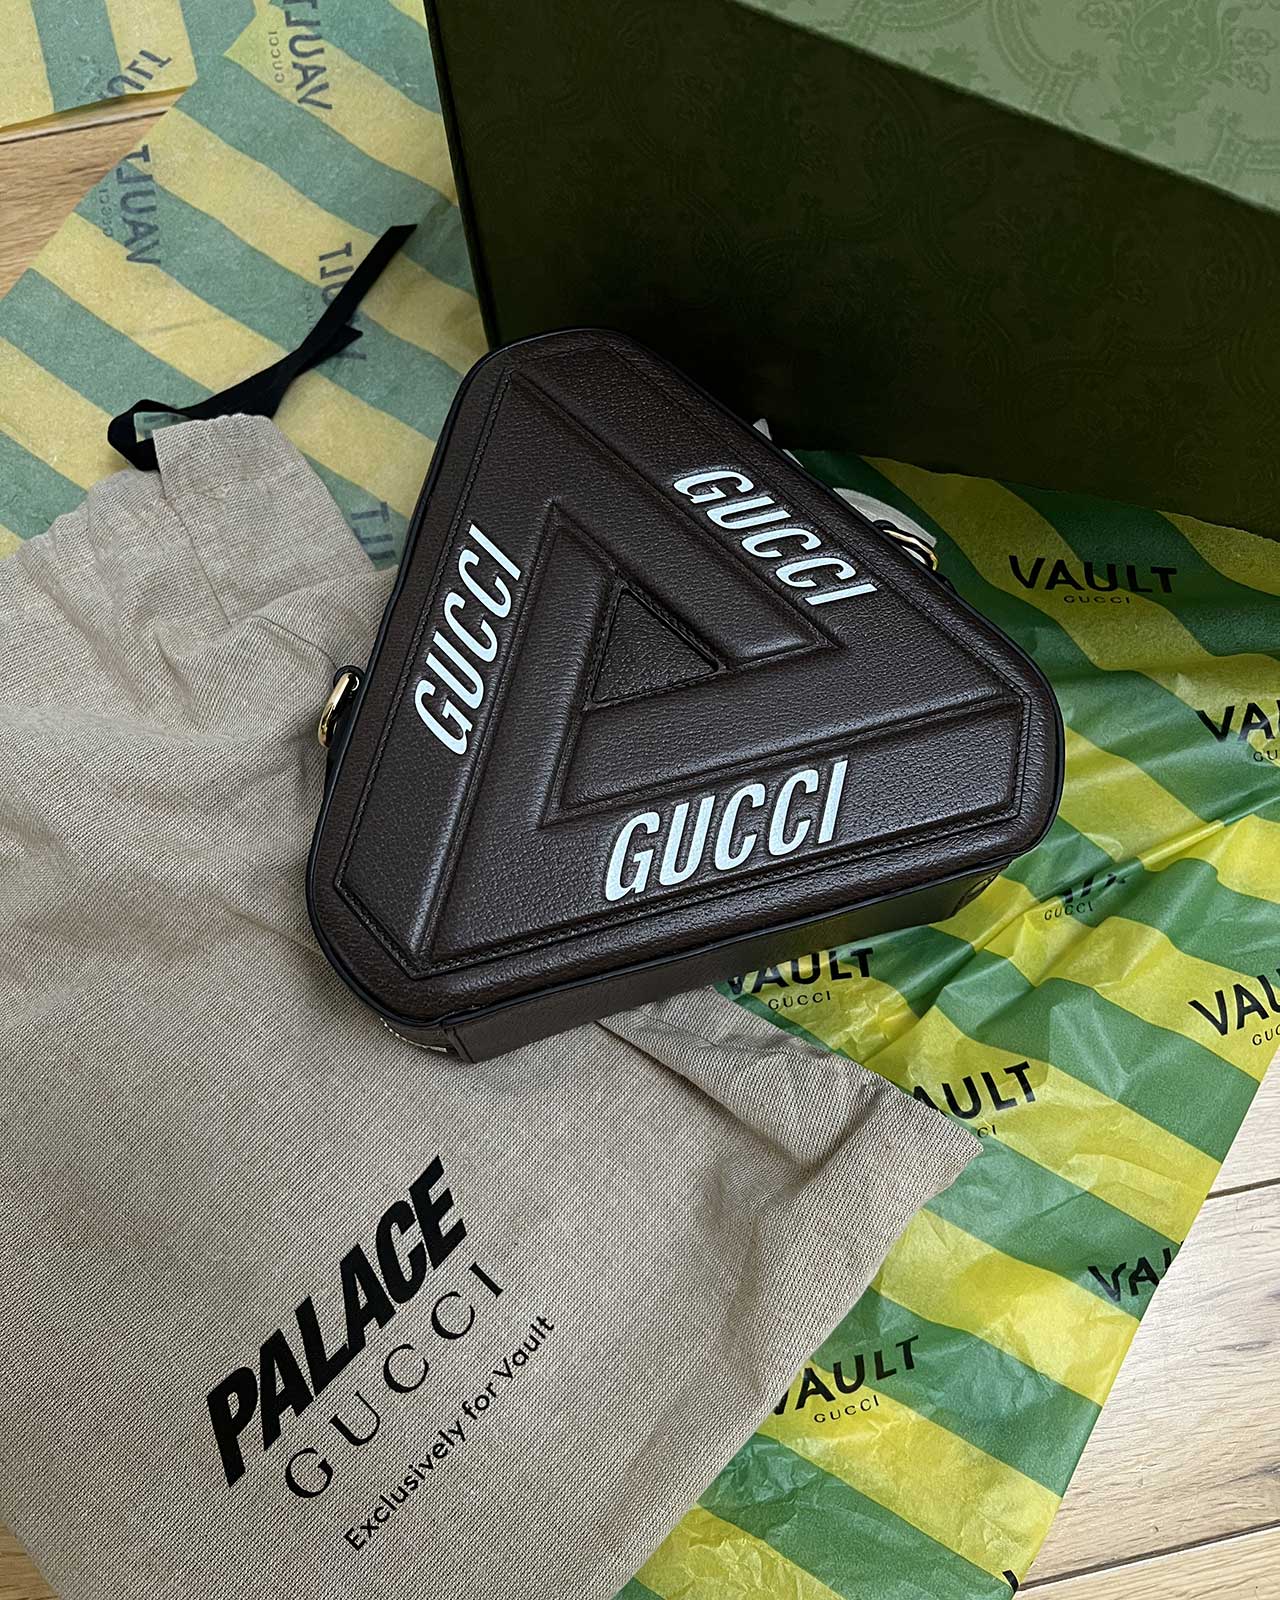 Here's what went down at the Palace Gucci launch event - The Face